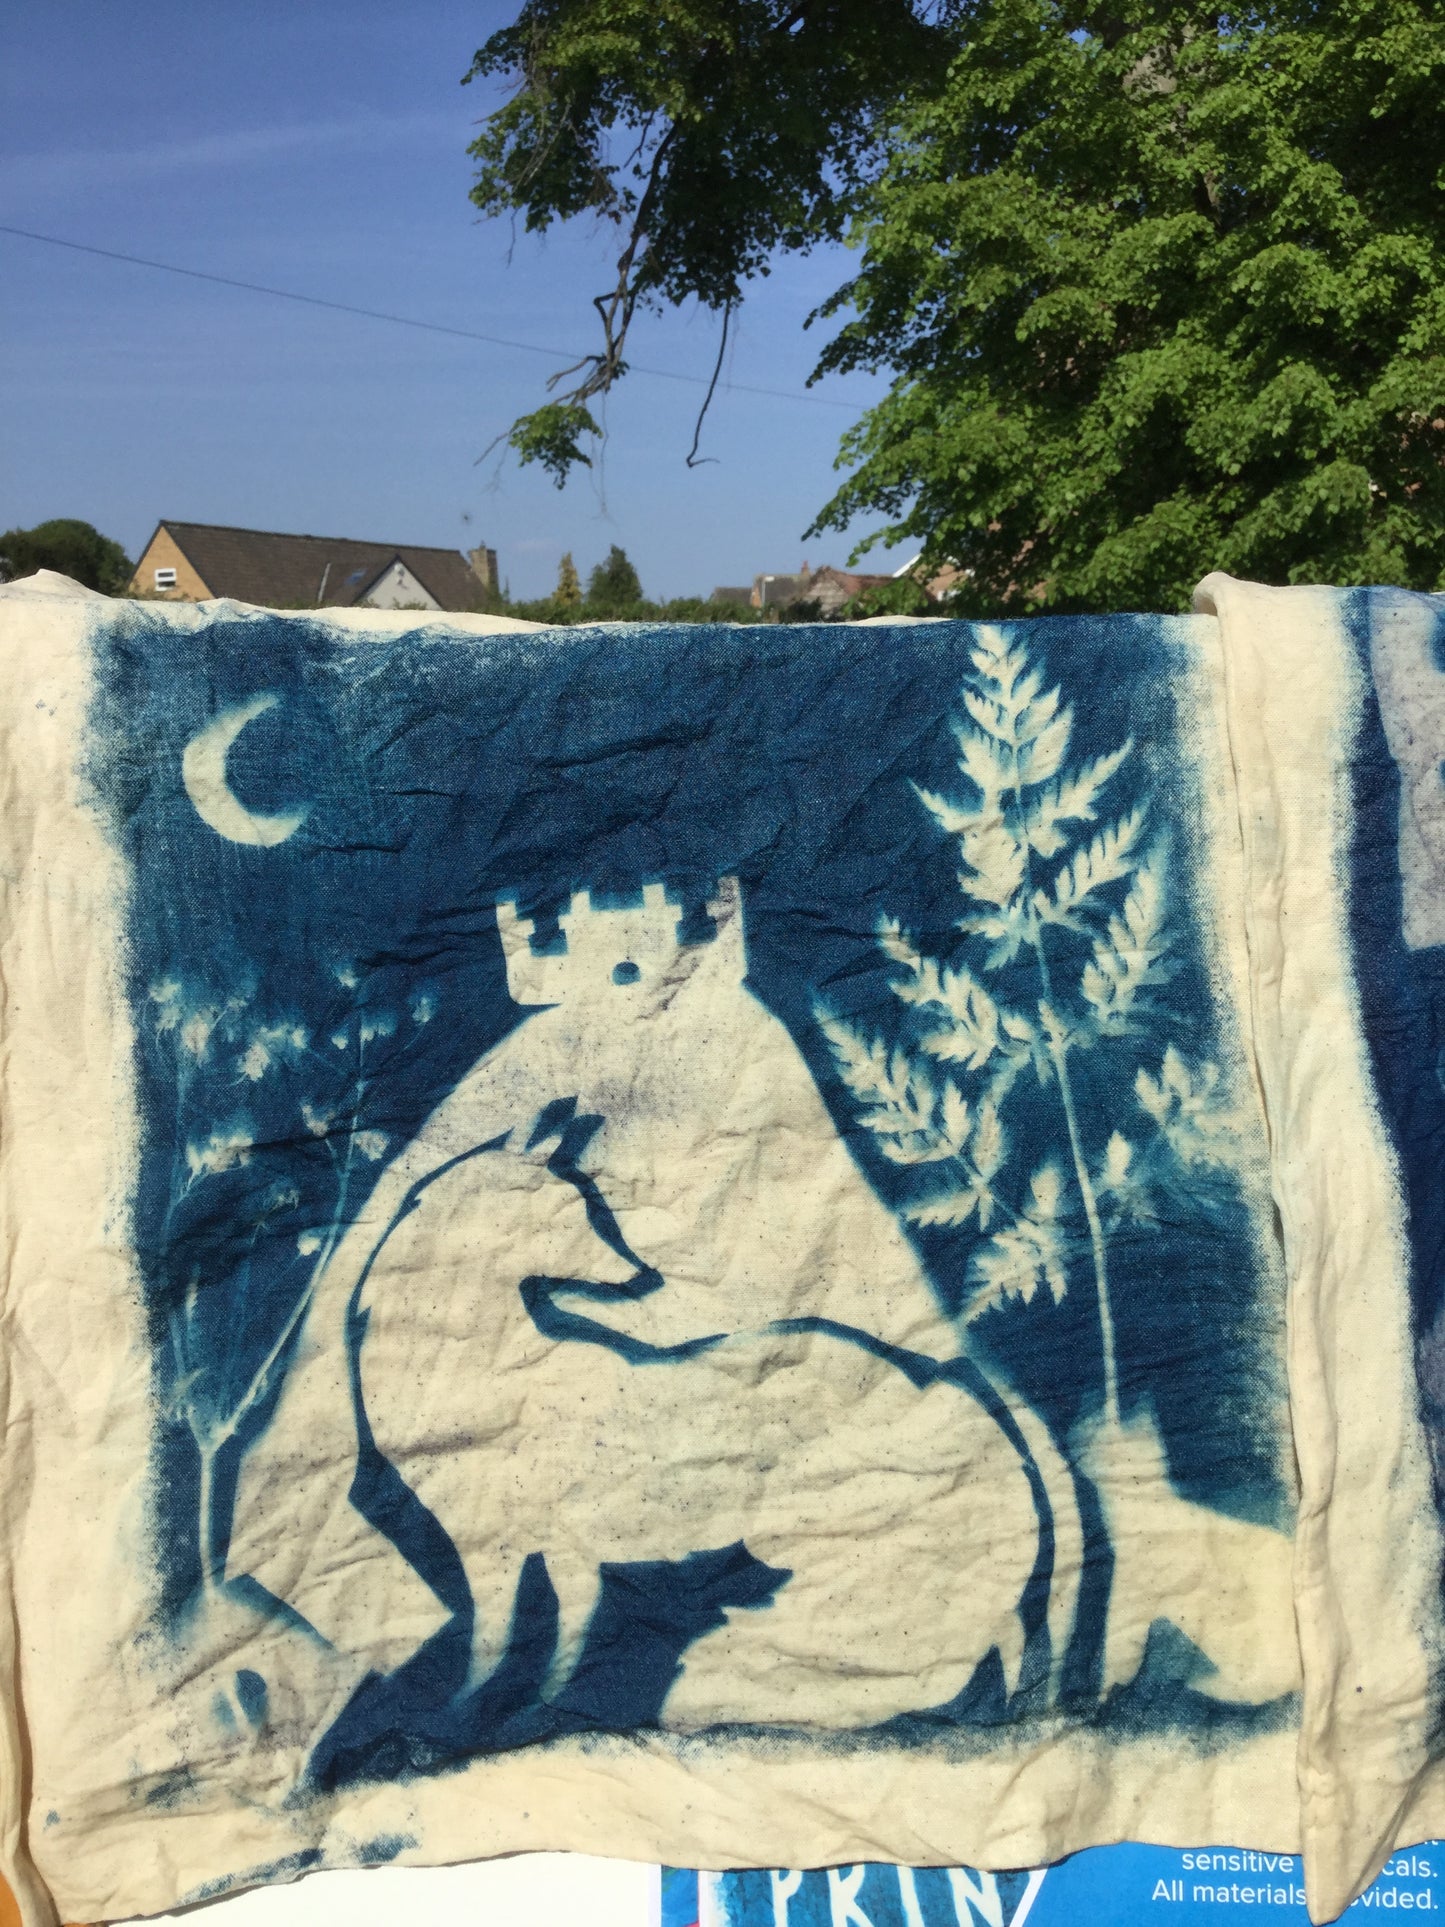 "Making Photographs without a Camera" Cyanotype Workshop with Alun in Porto, Portugal